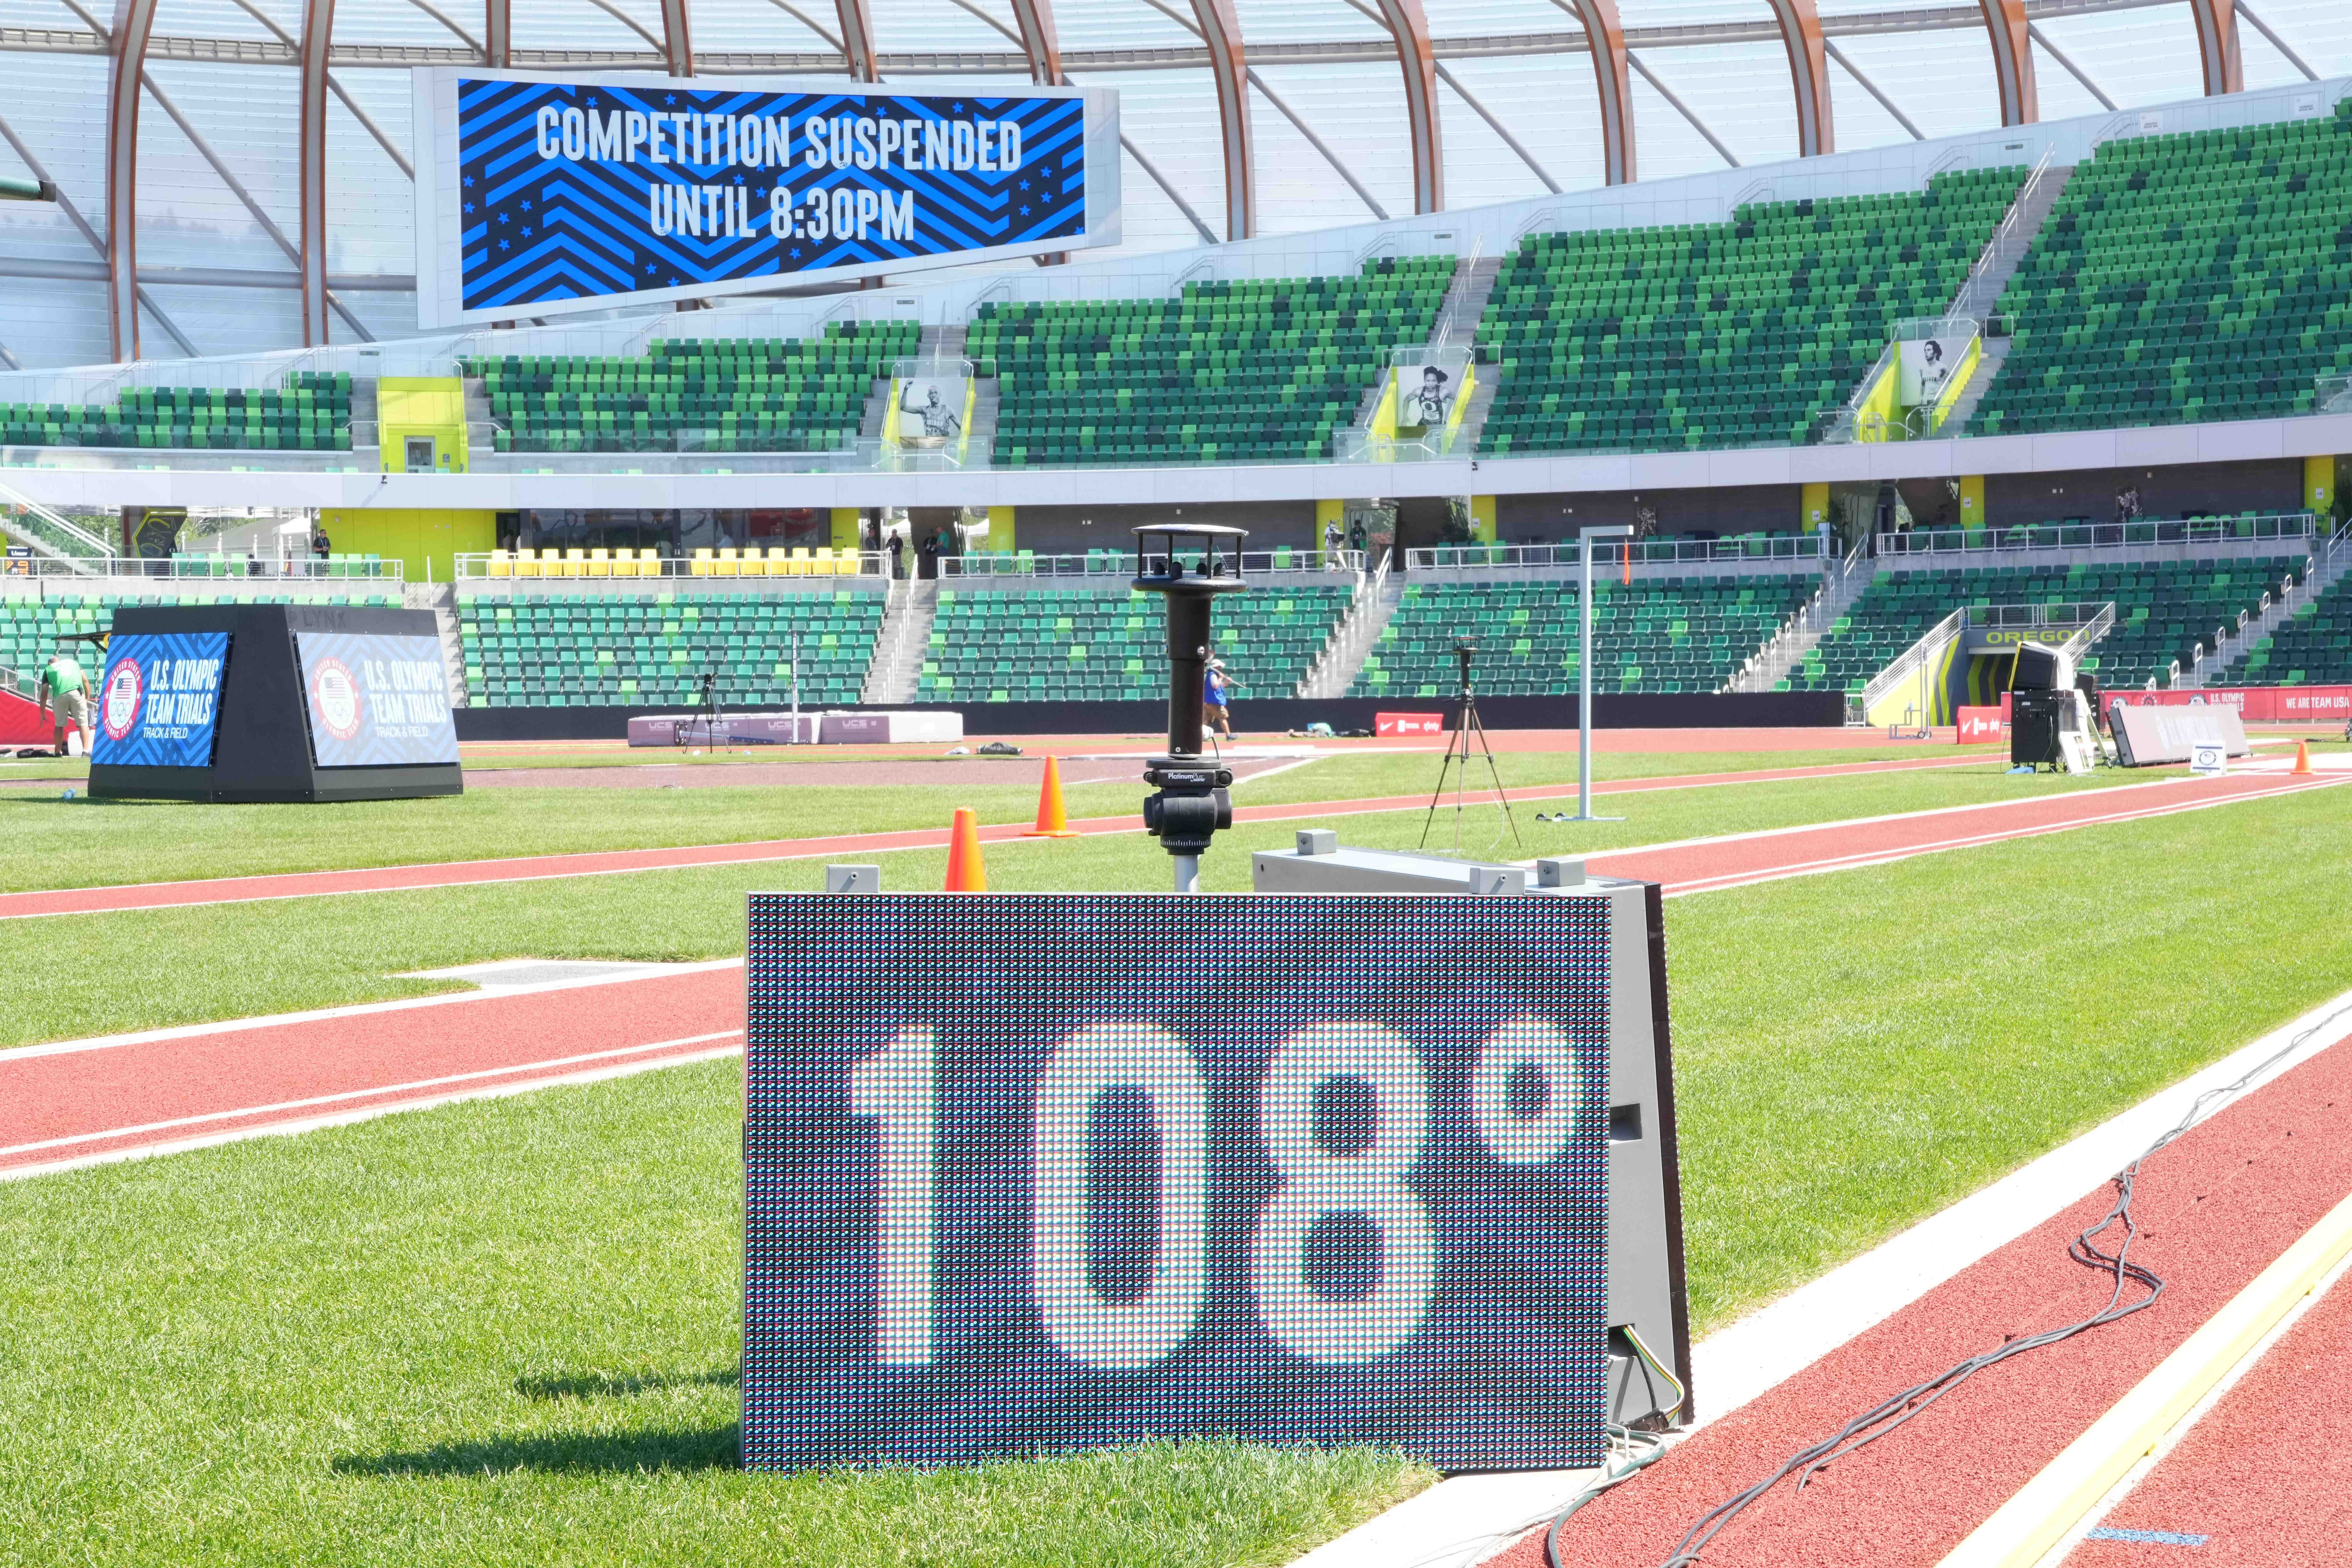 Jun 27, 2021; Eugene, OR, USA; The temperature reads 108 degrees during the US Olympic Team Trials at Hayward Field. Mandatory Credit: Kirby Lee-USA TODAY Sports